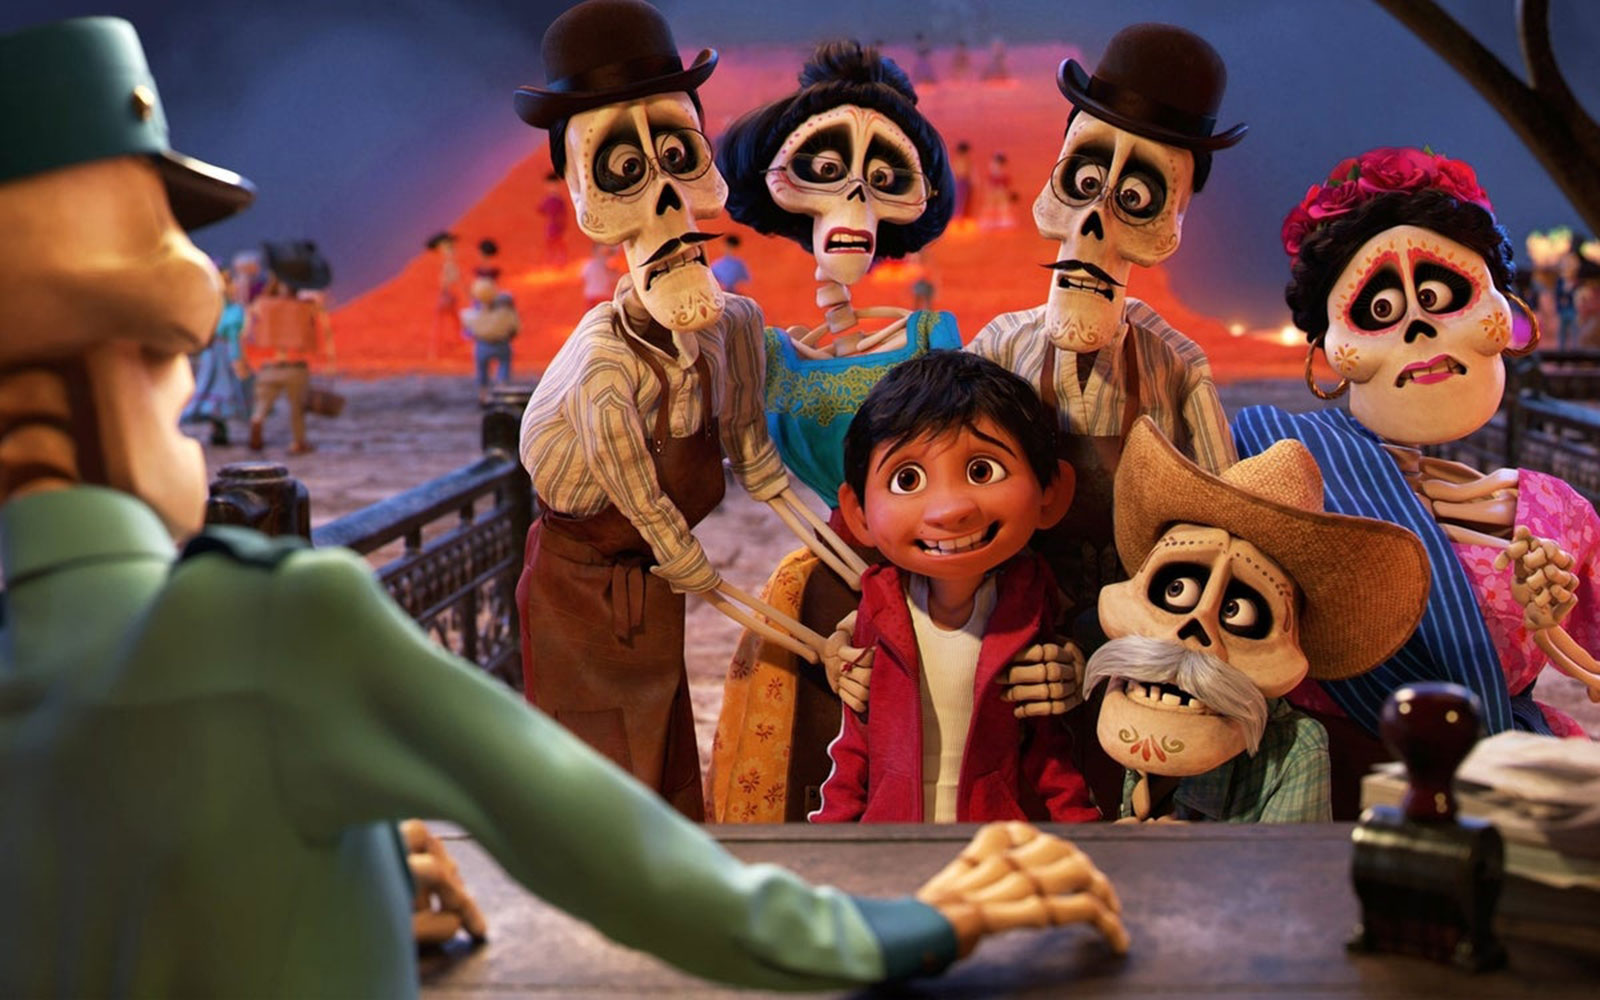 Only a True Pixar Fan Has Watched 18/21 of These Movies Coco